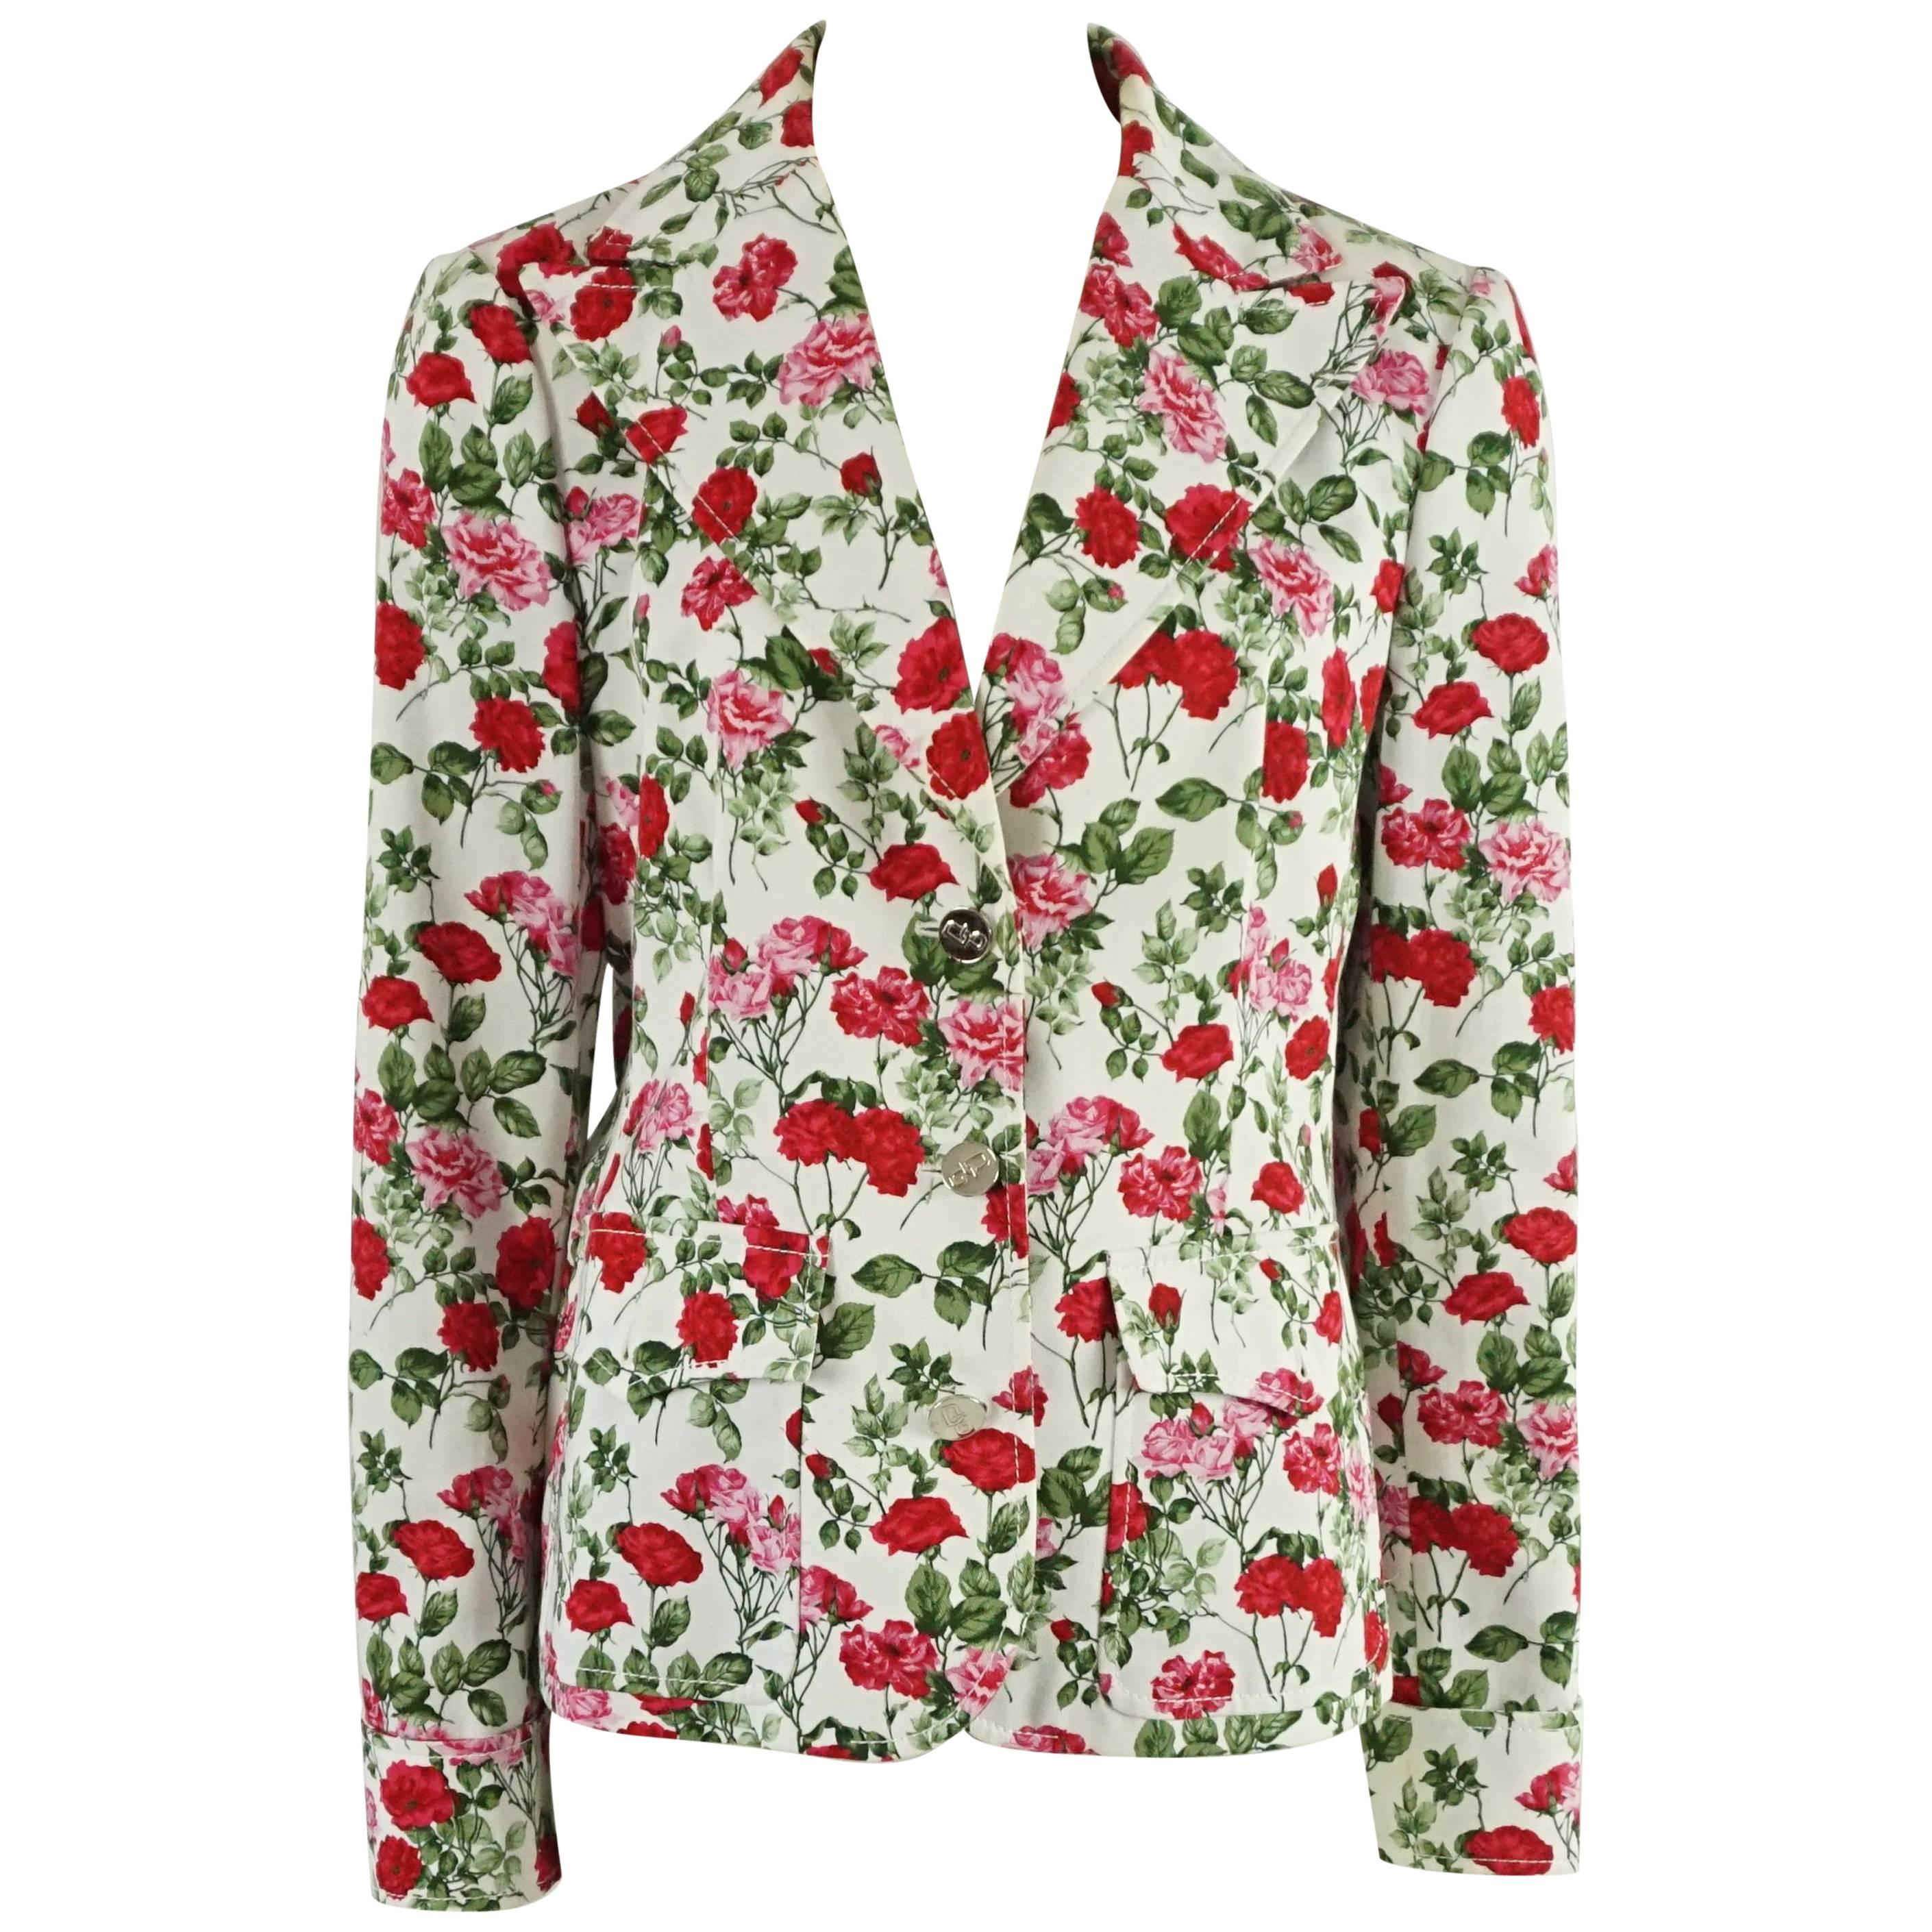 Dolce & Gabbana Red, Green, and White Floral Print Jacket - 44